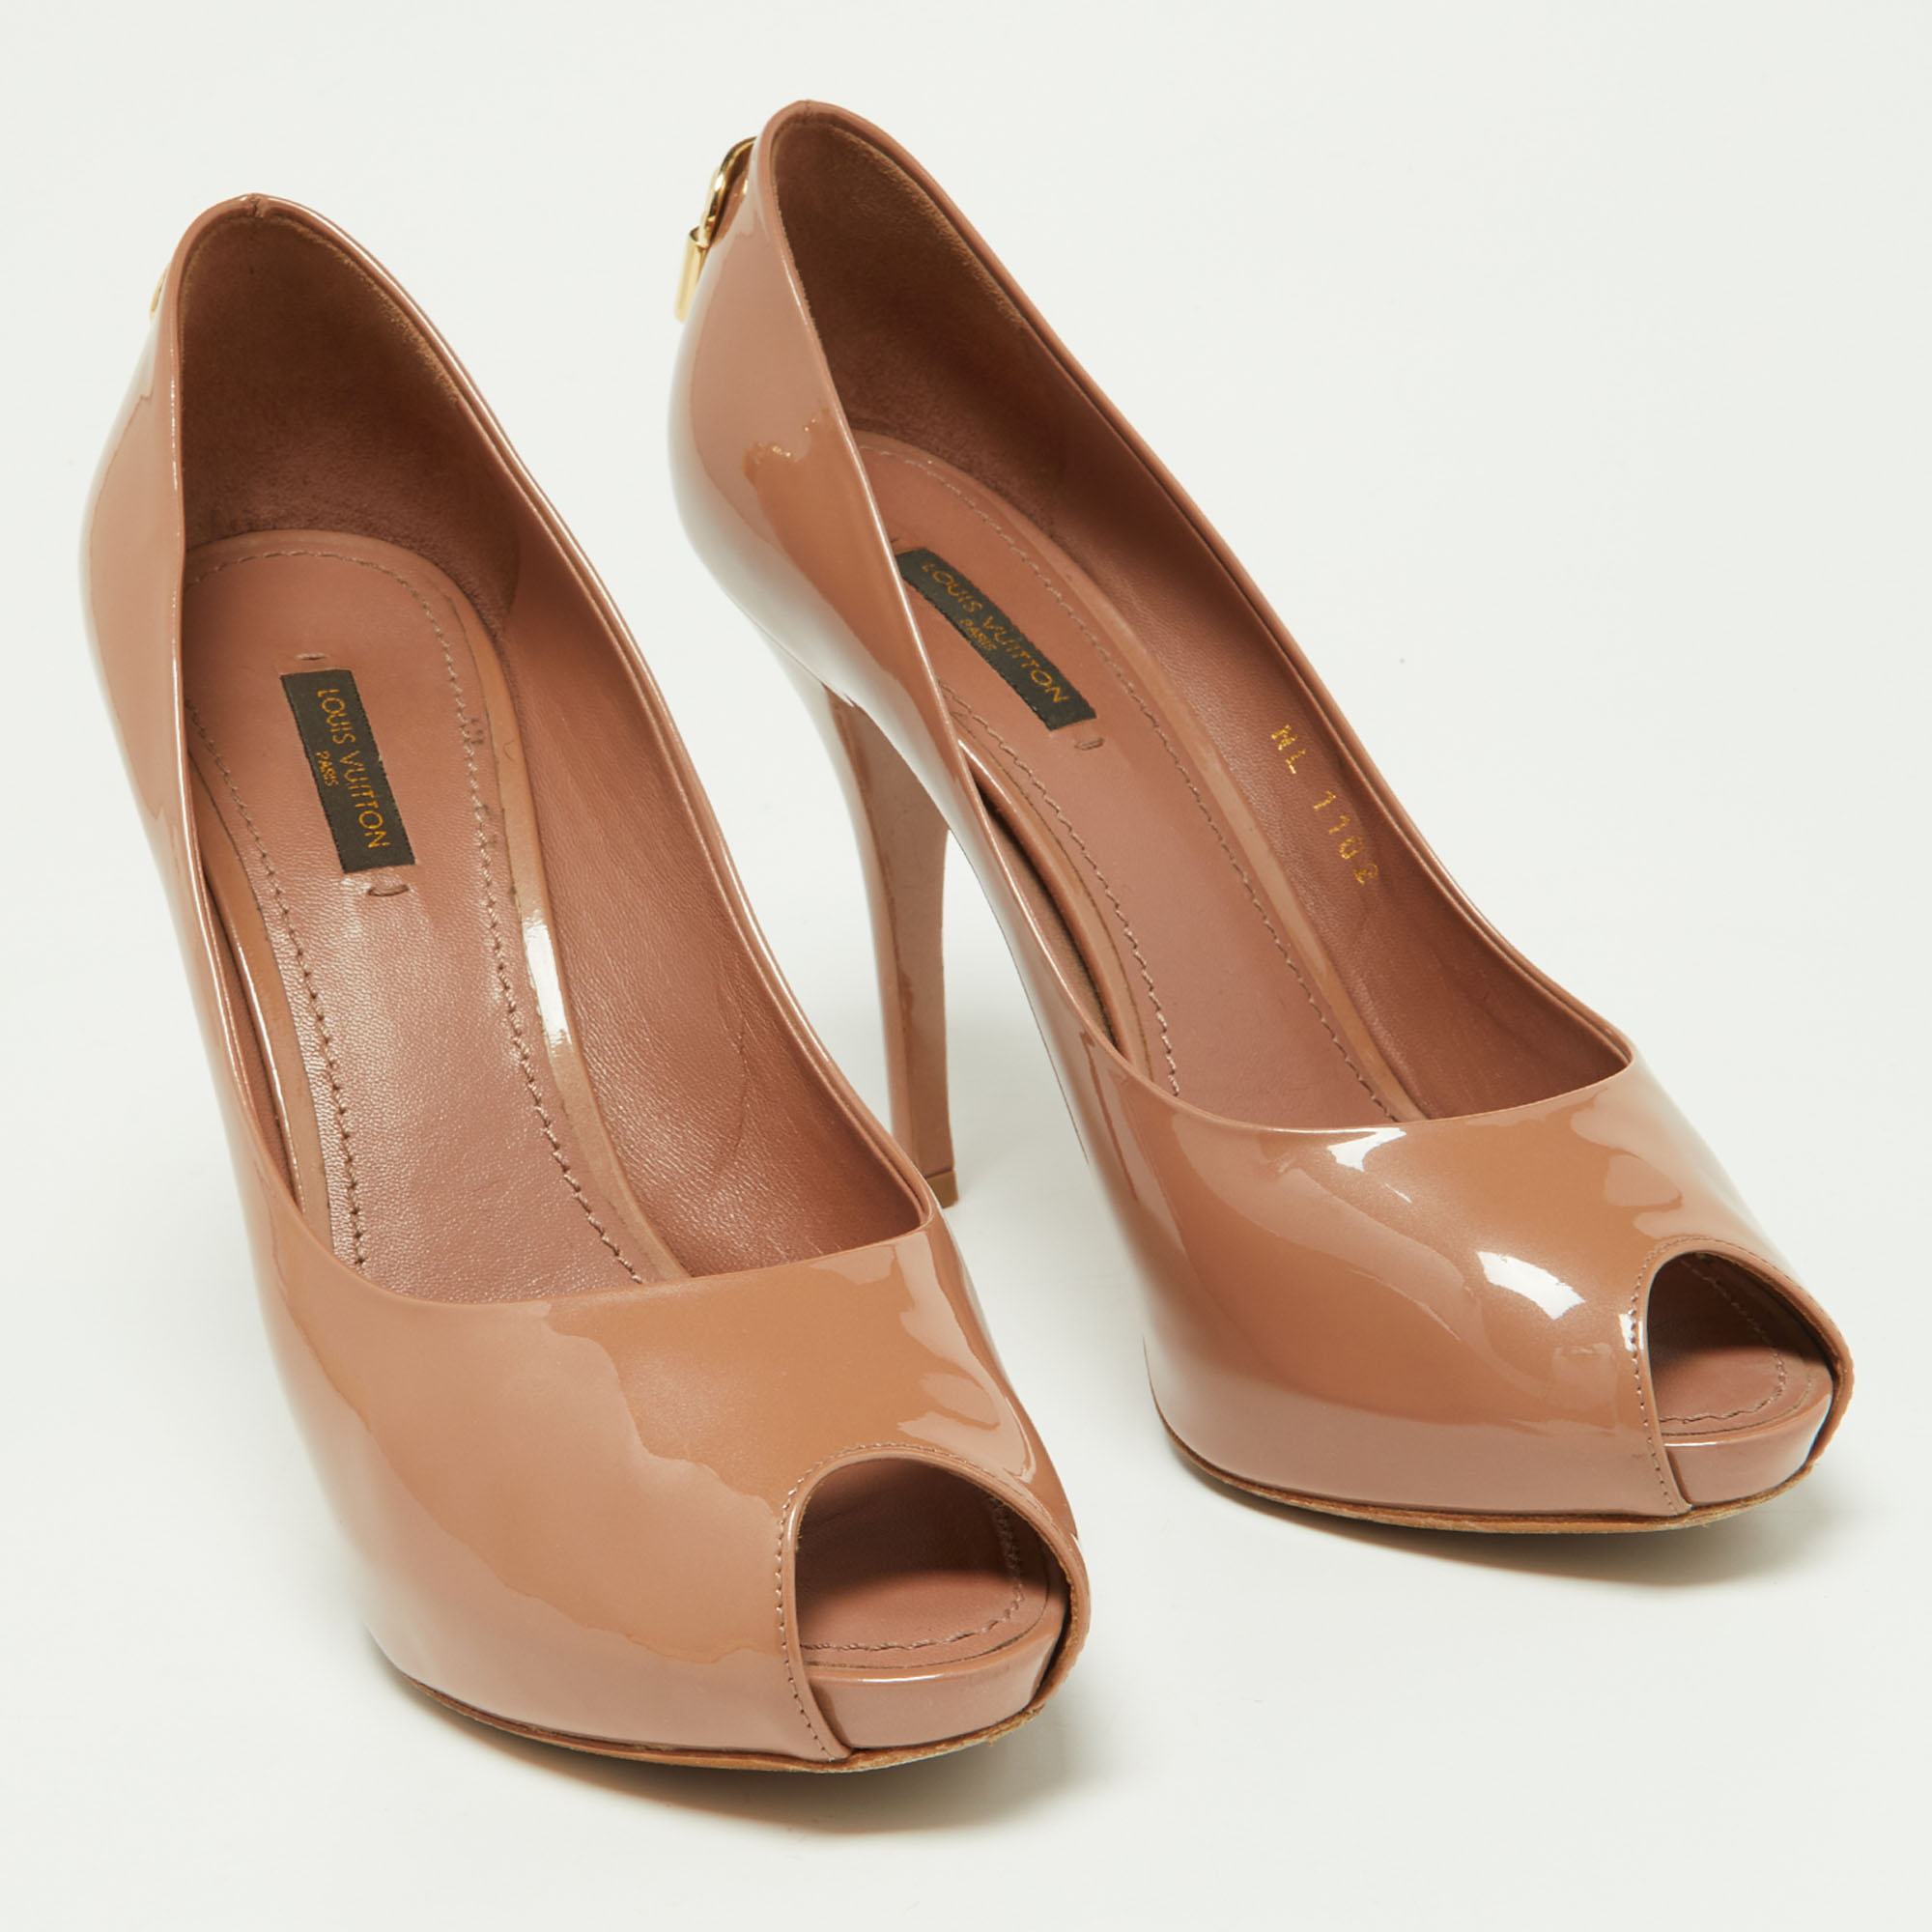 Louis Vuitton Beige Patent Leather Oh Really! Pumps Size 39